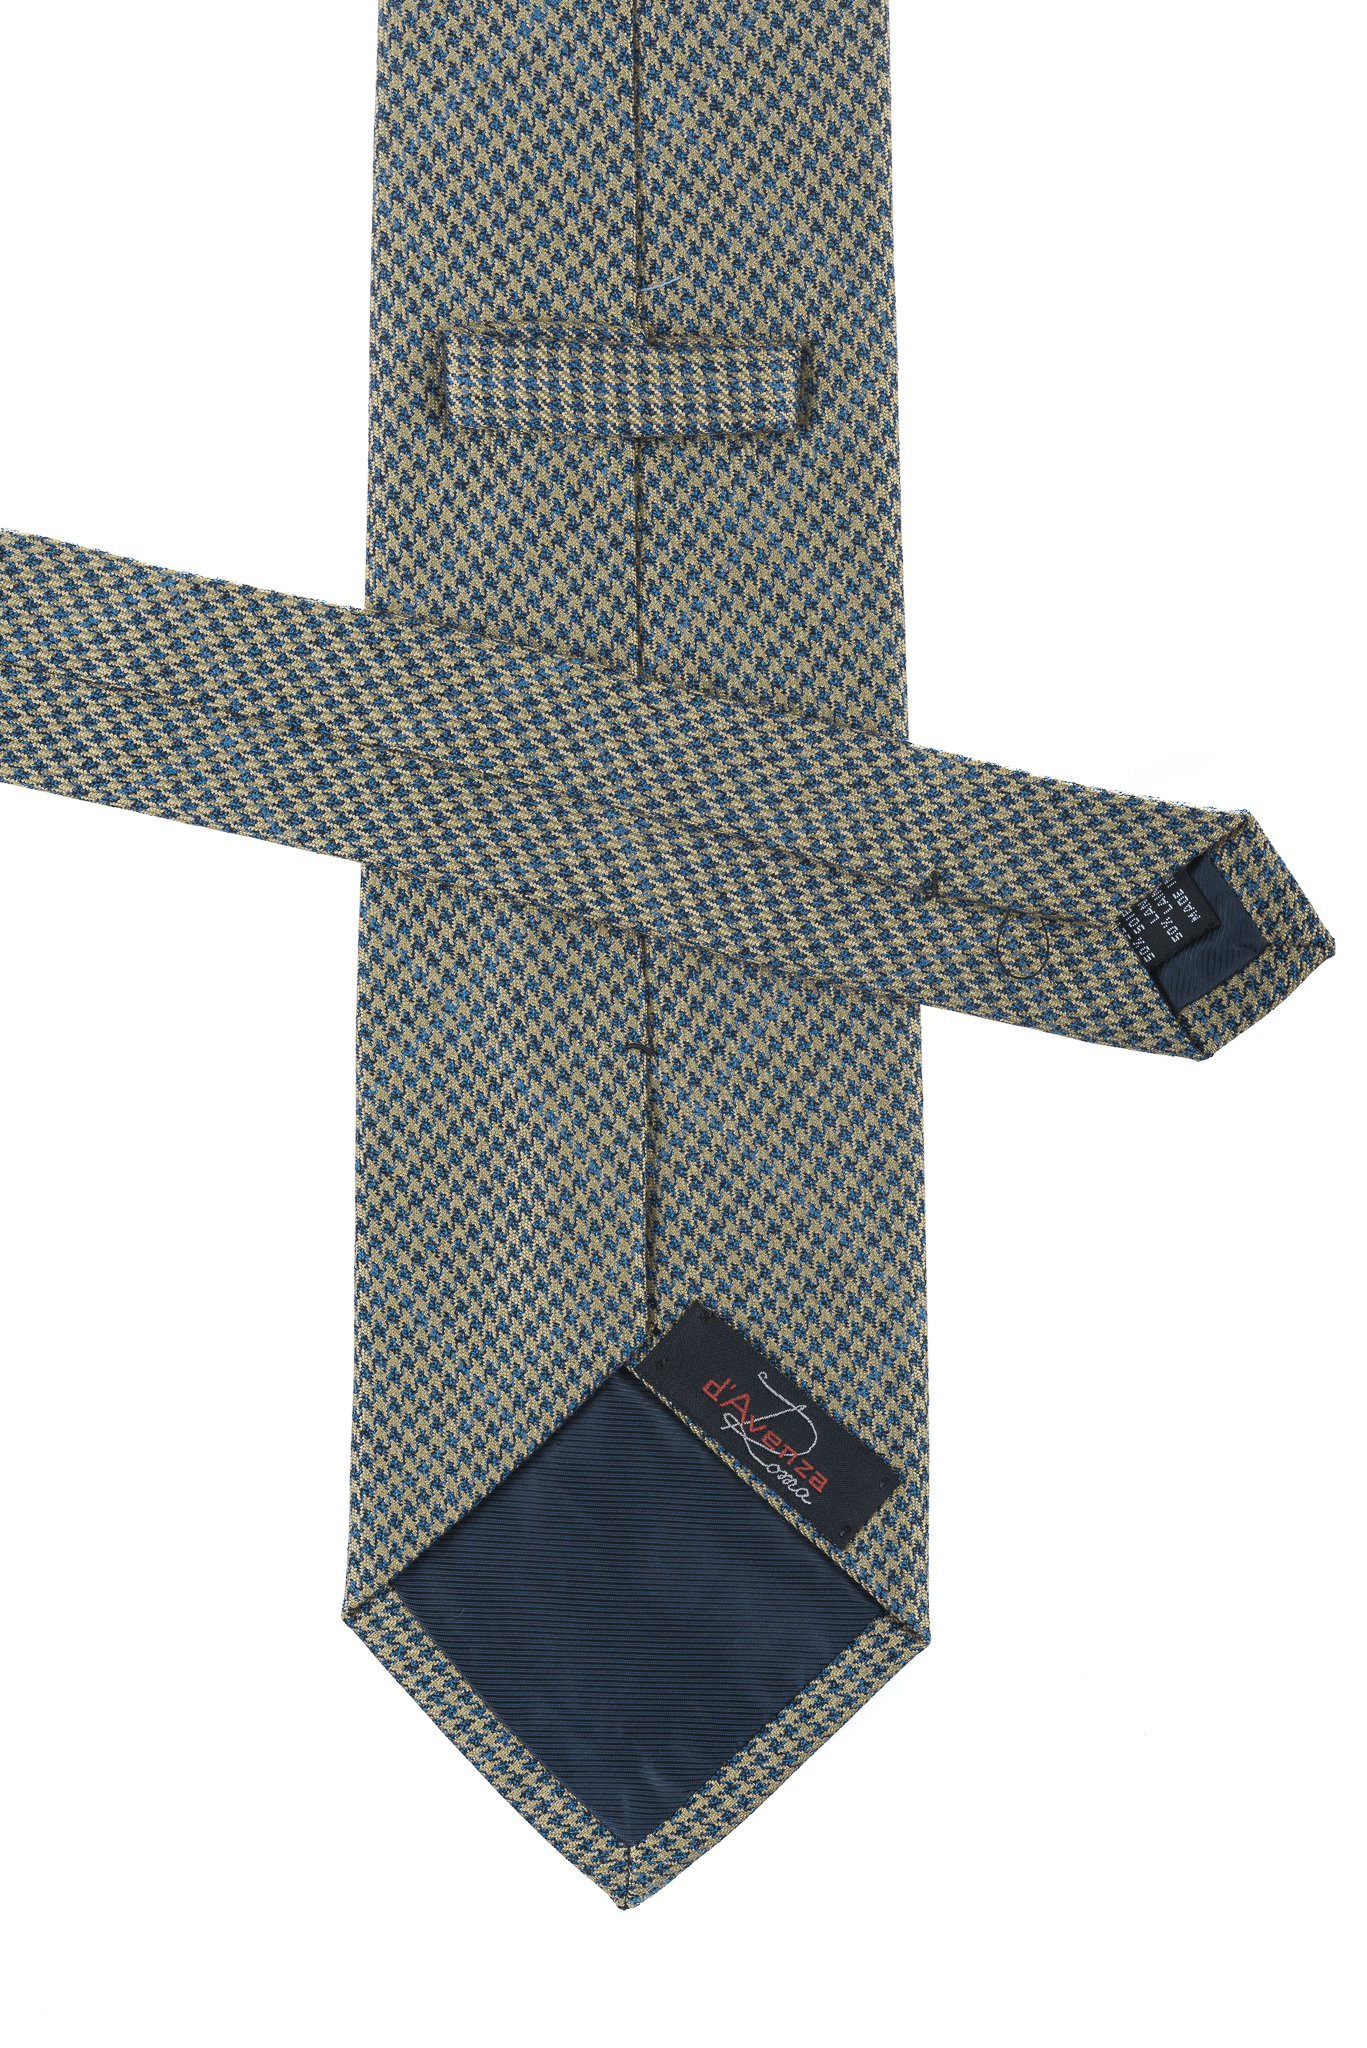 $179 D'AVENZA Tie Wool + Silk Houndstooth Hand-Sewn in Italy / 57.48 ...